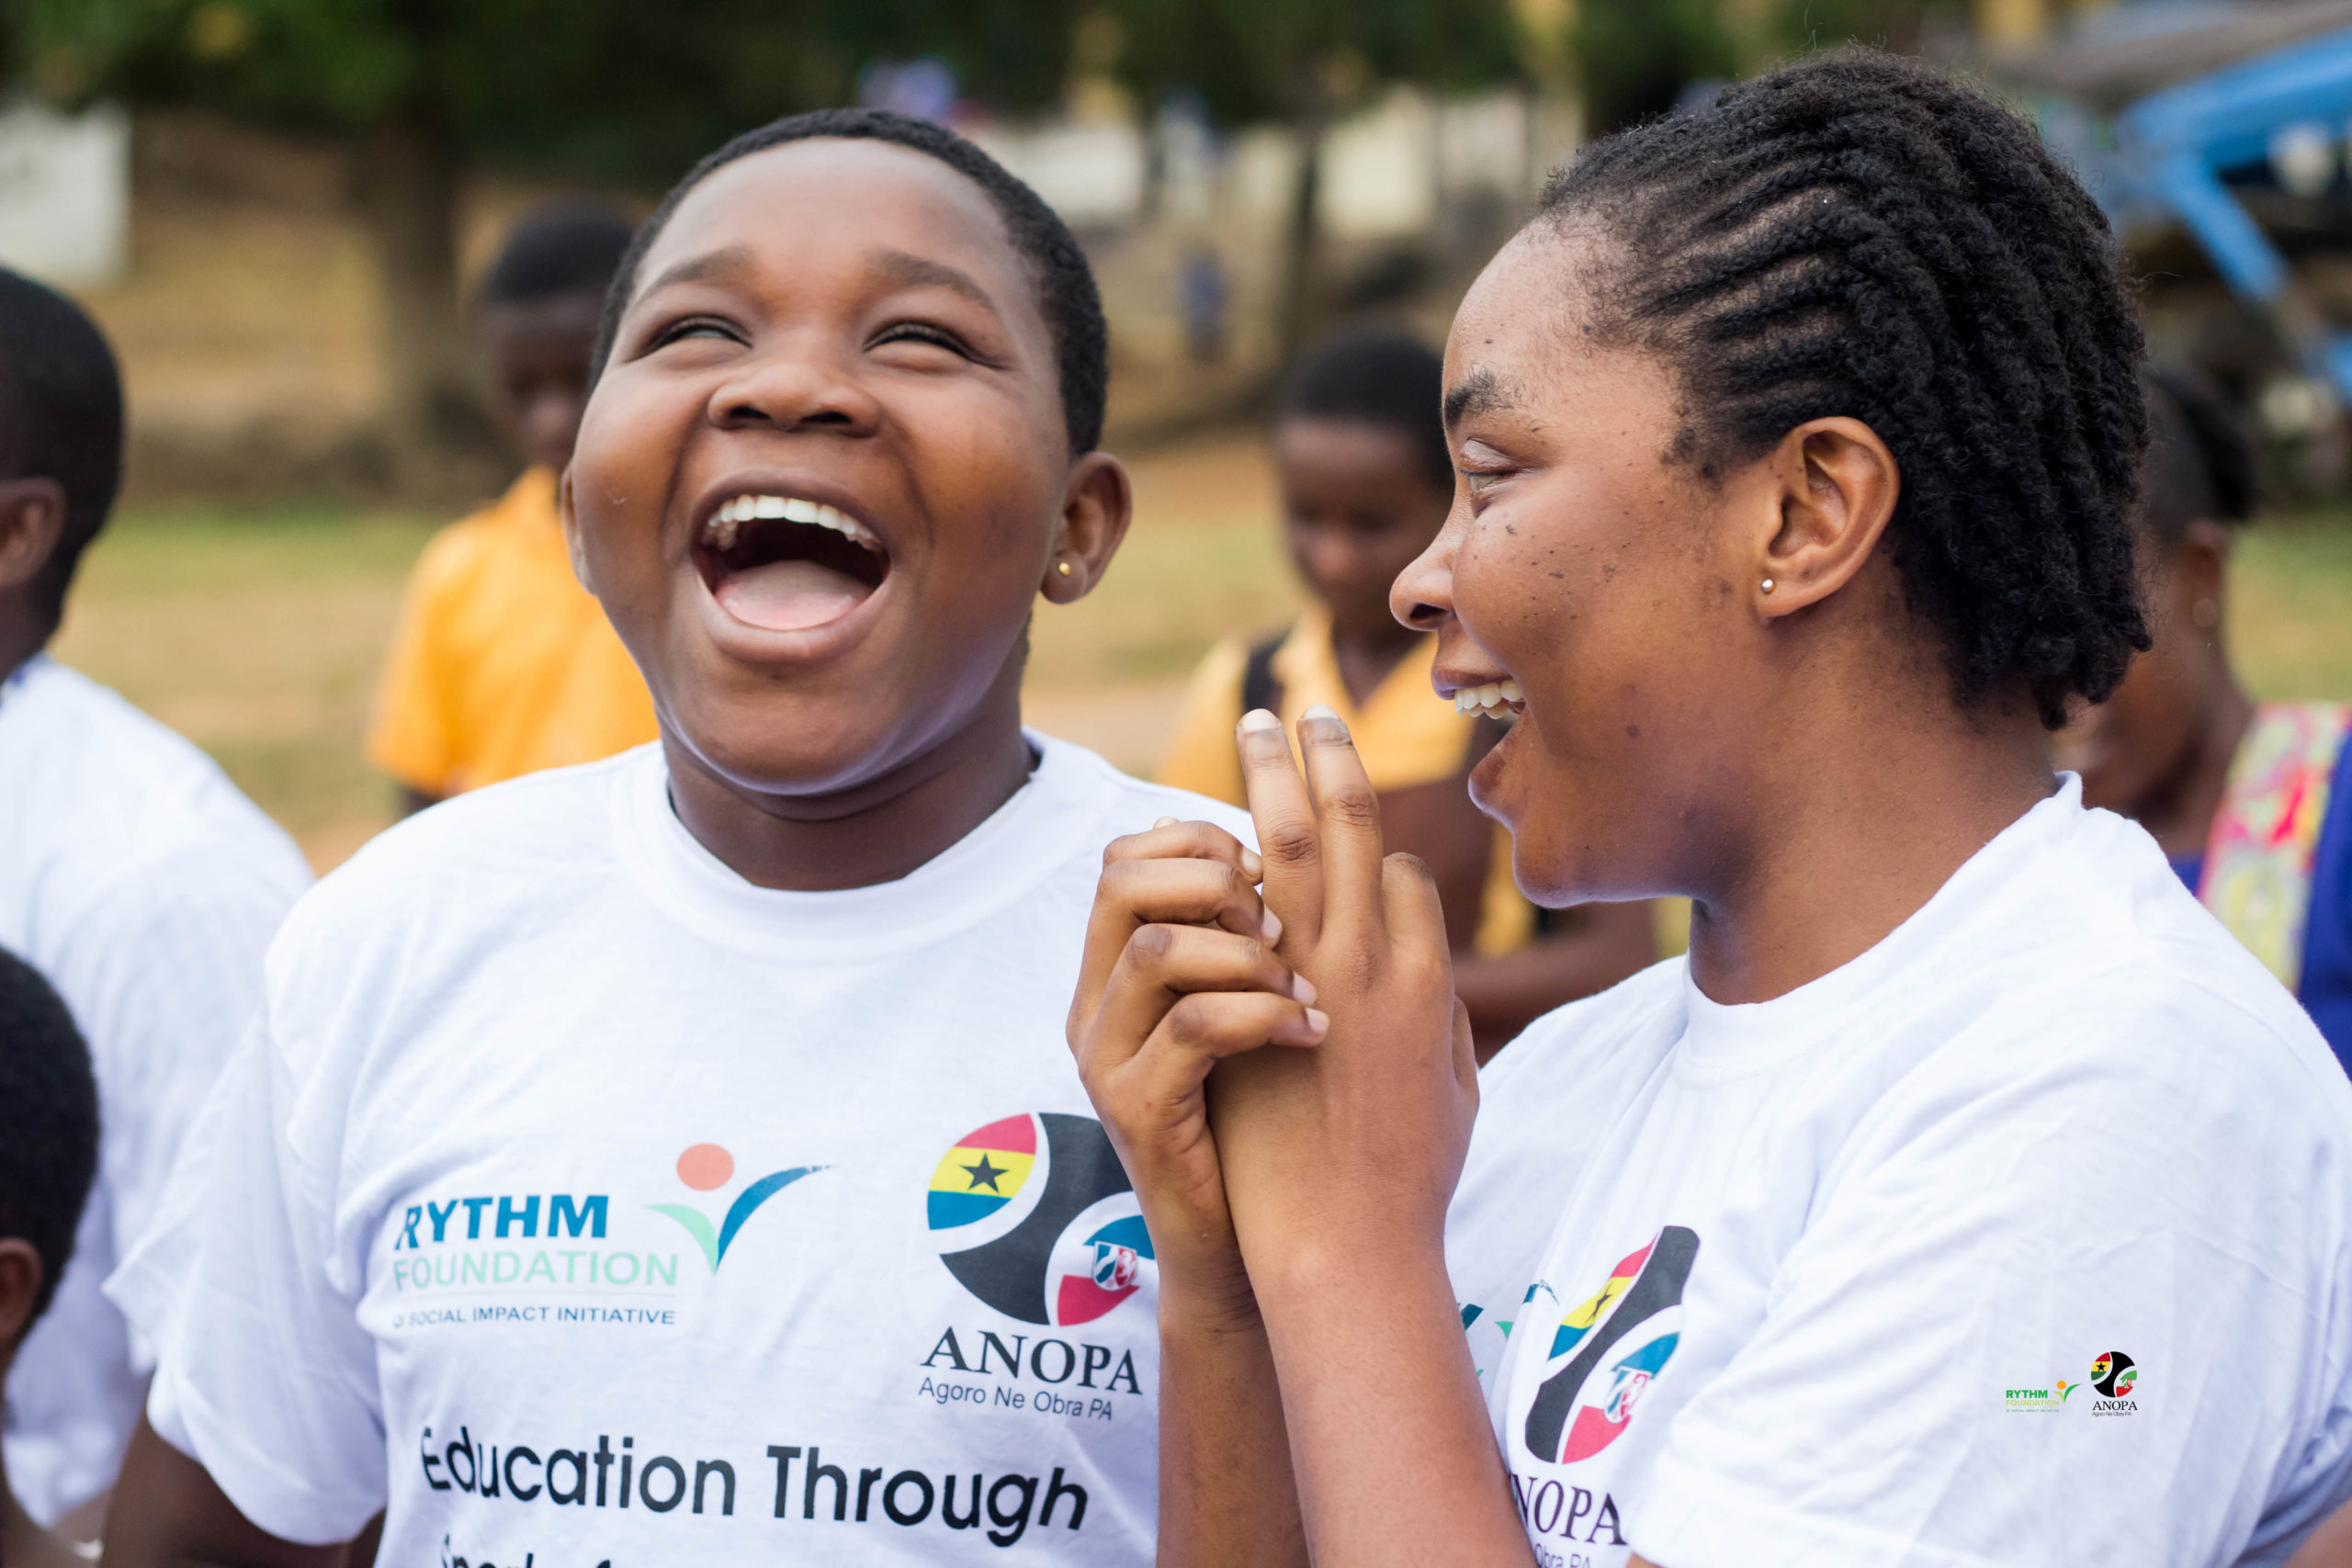 RYTHM Foundation Joins Hands with ANOPA Project to Keep Ghanaian Youth with Disabilities in School